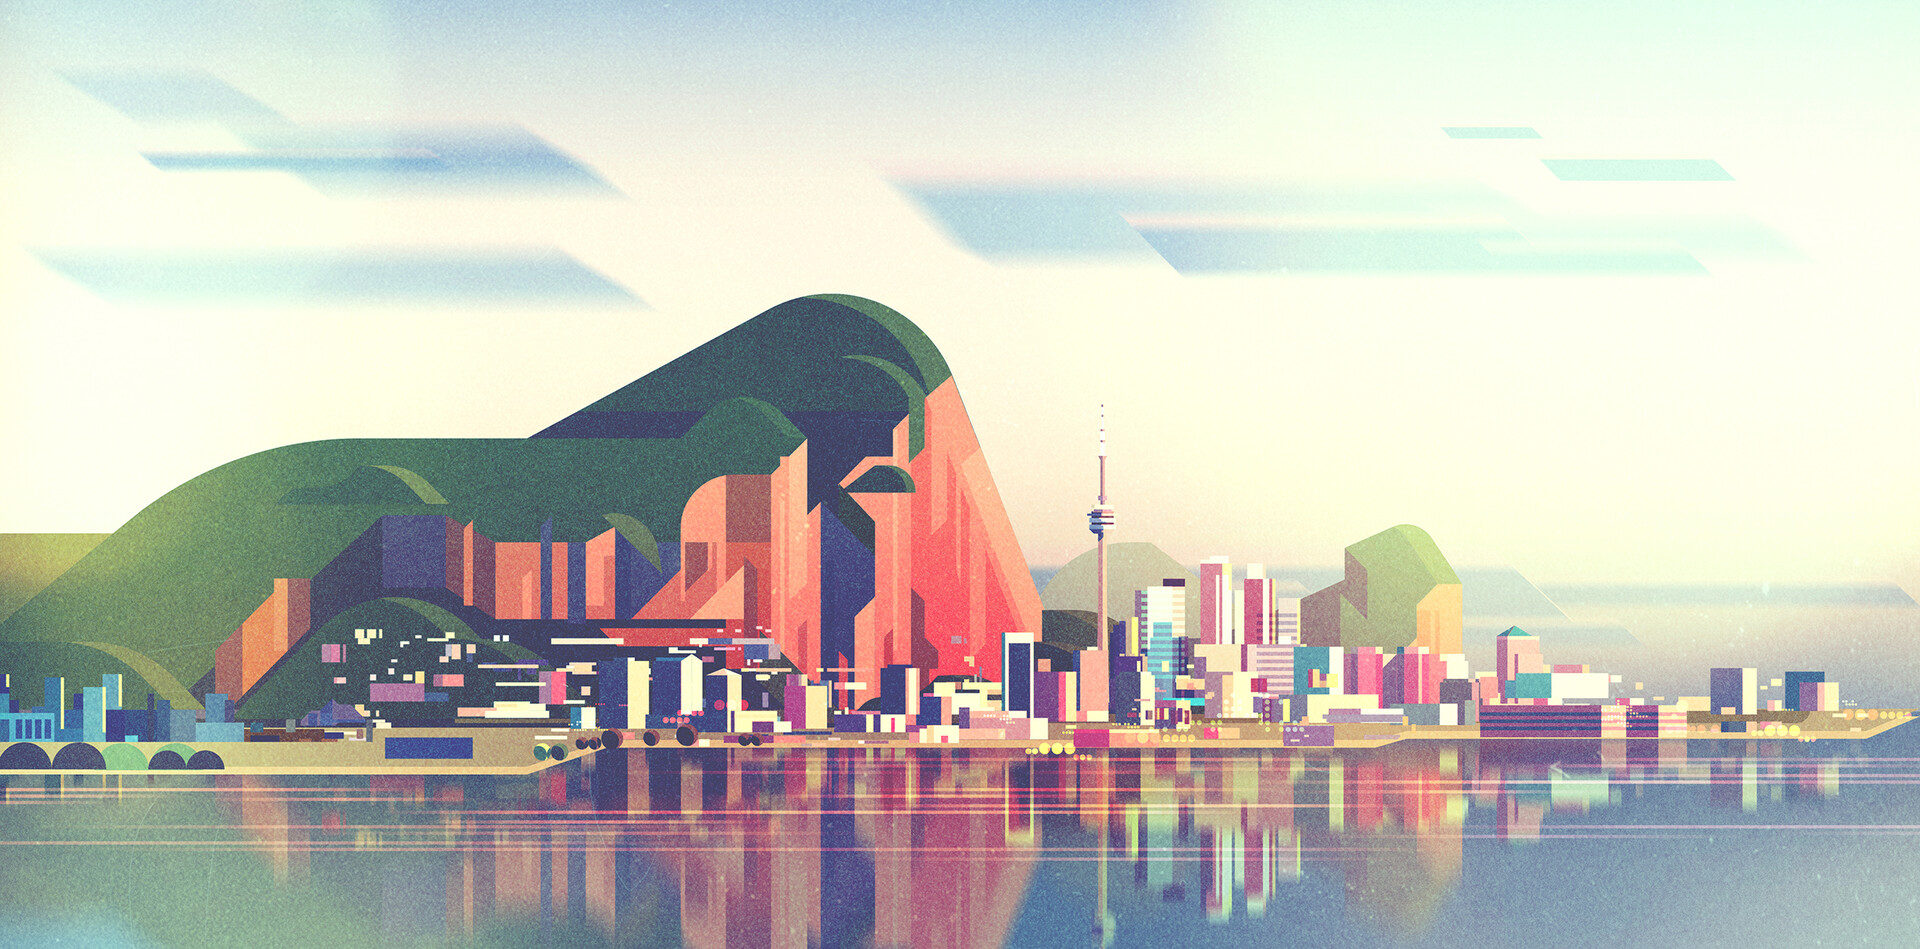 City Building Skyscraper Tower Mountain View Clouds Water Reflection James Gilleard 1920x949